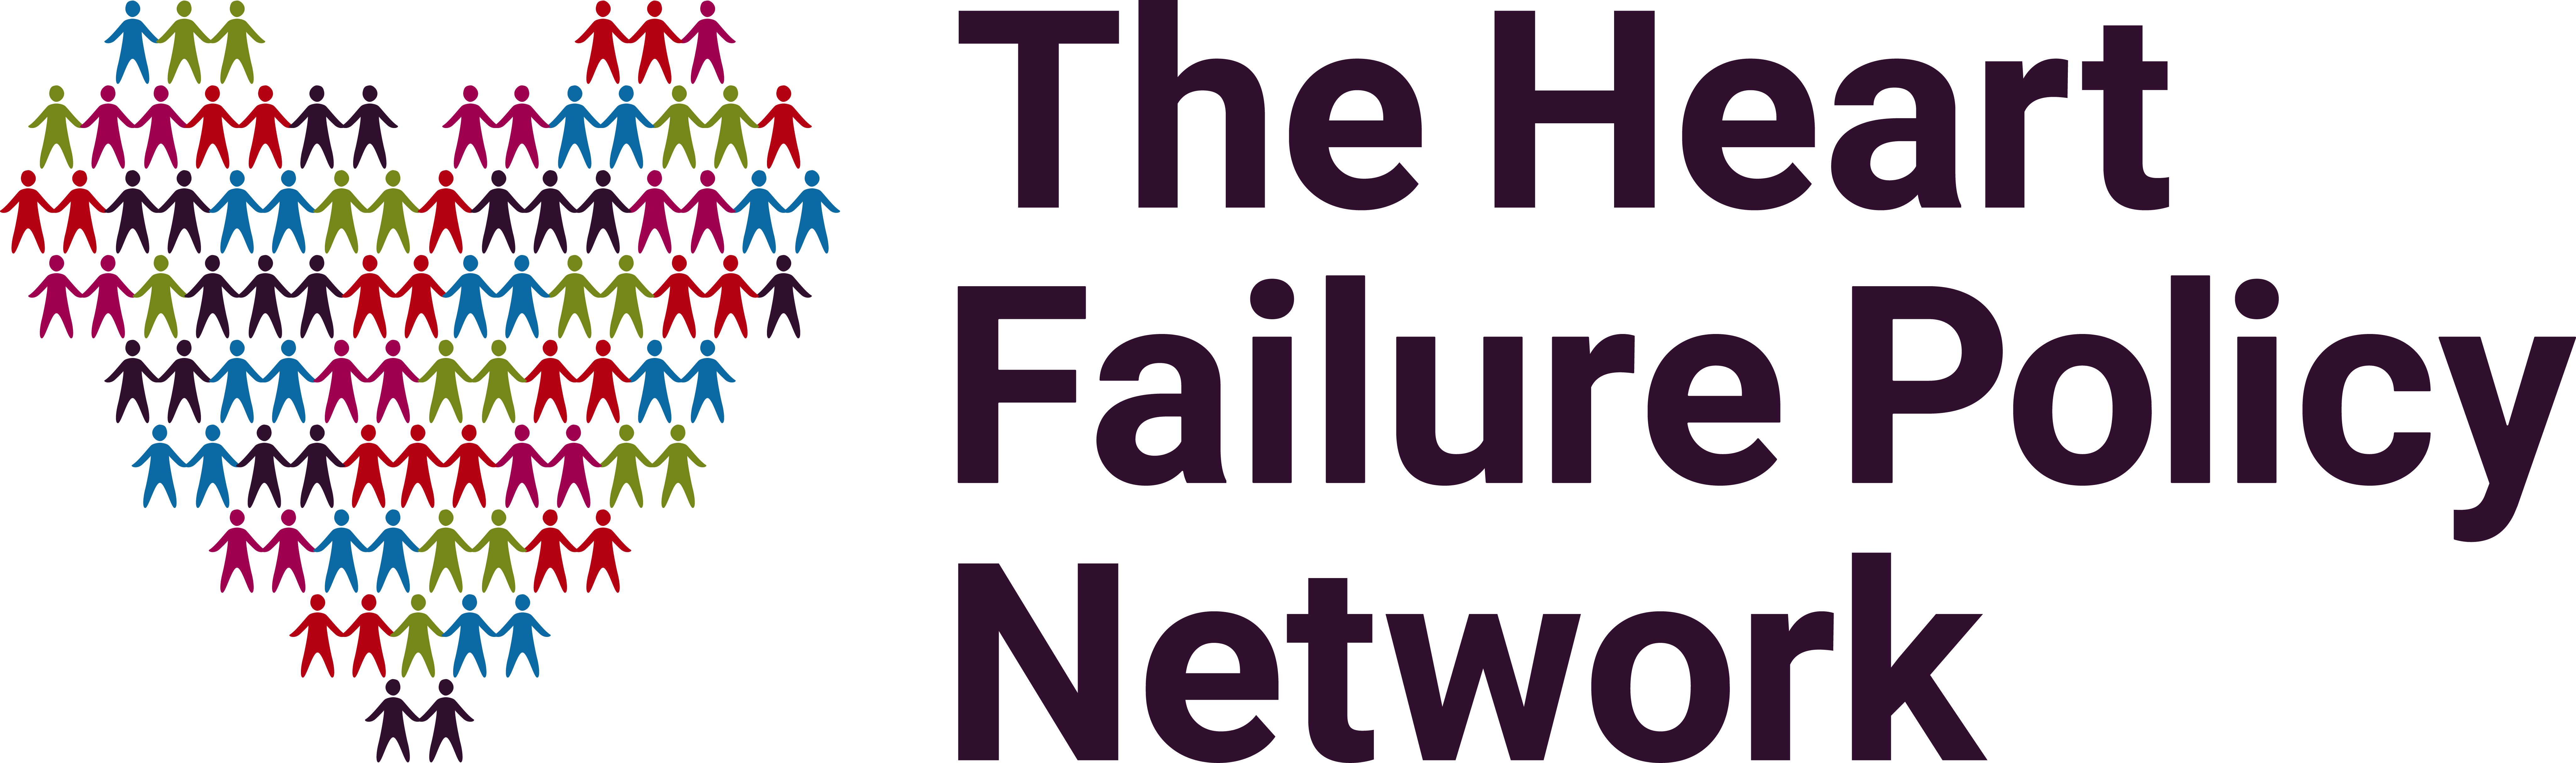 Heart Failure Policy Network